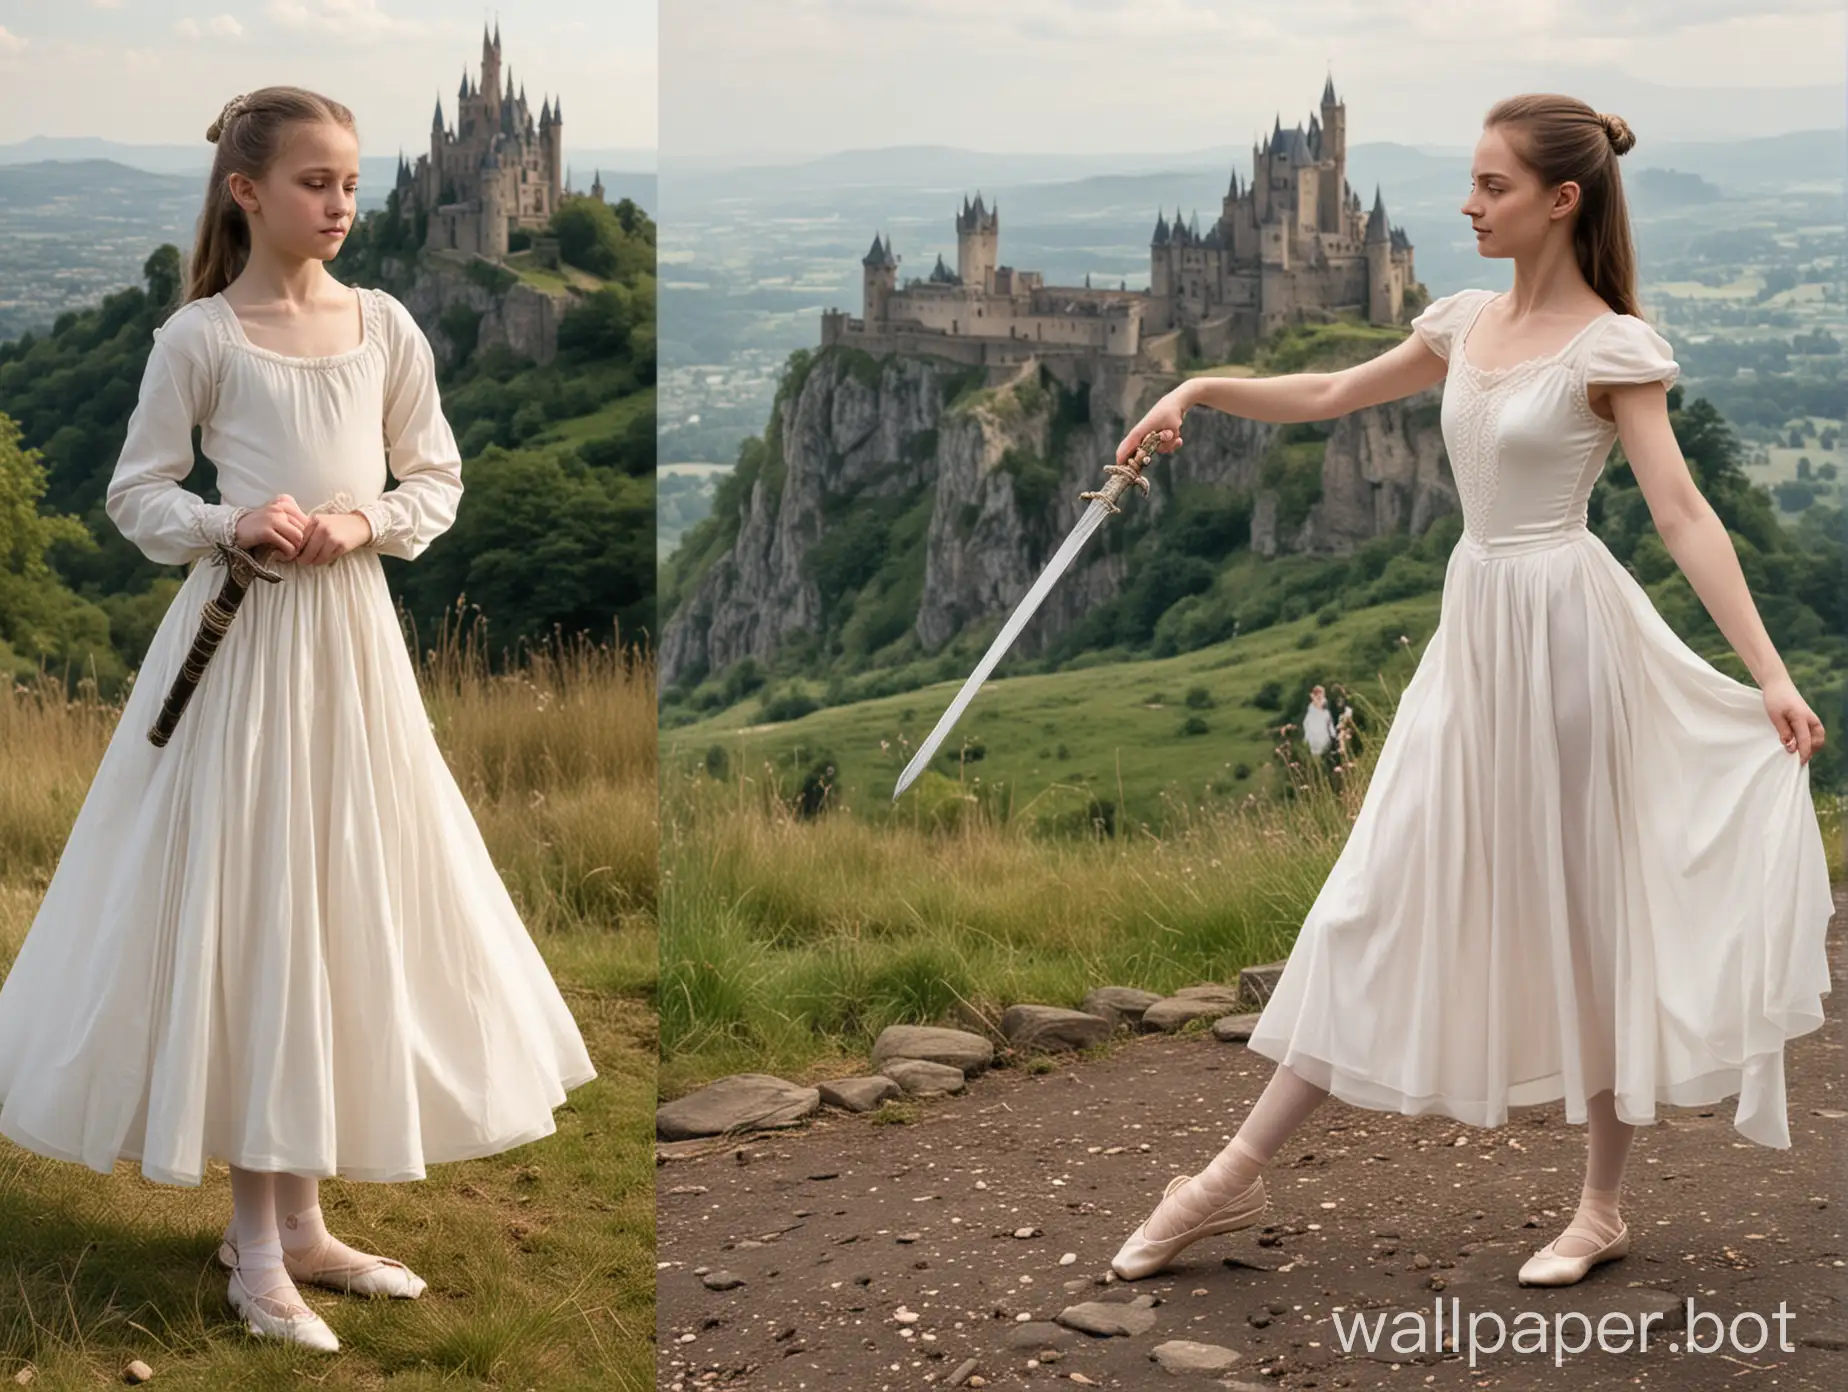 Woman-with-Sword-and-Ballet-Girl-near-Hilltop-Castle